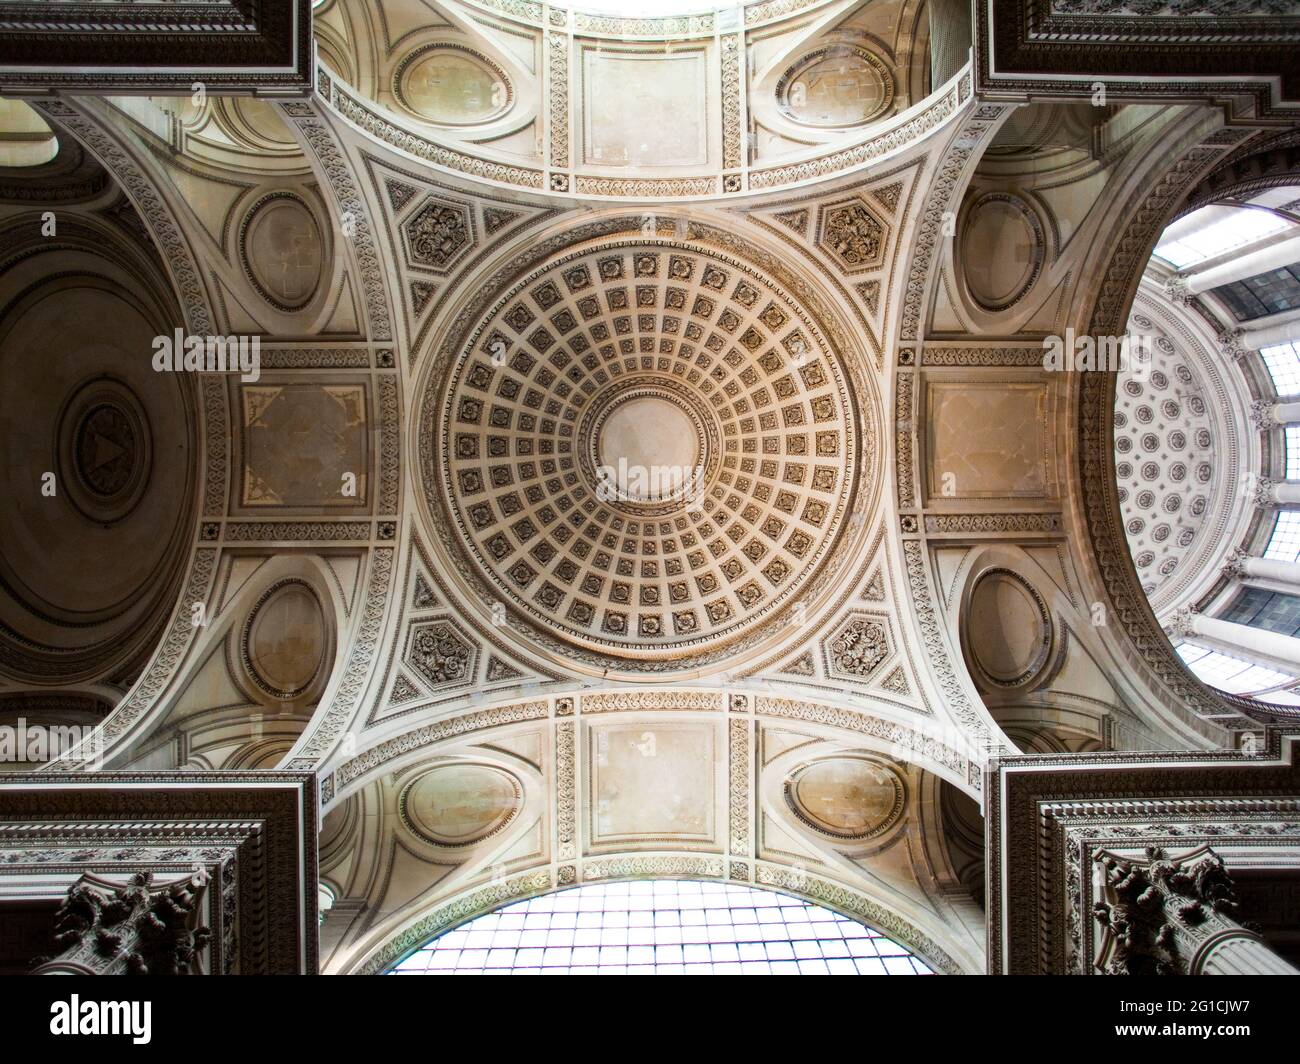 Interior of the Pantheon showing the inside of the dome alongside intricate tiles, and architectural columns, Paris, France, 2012 Stock Photo